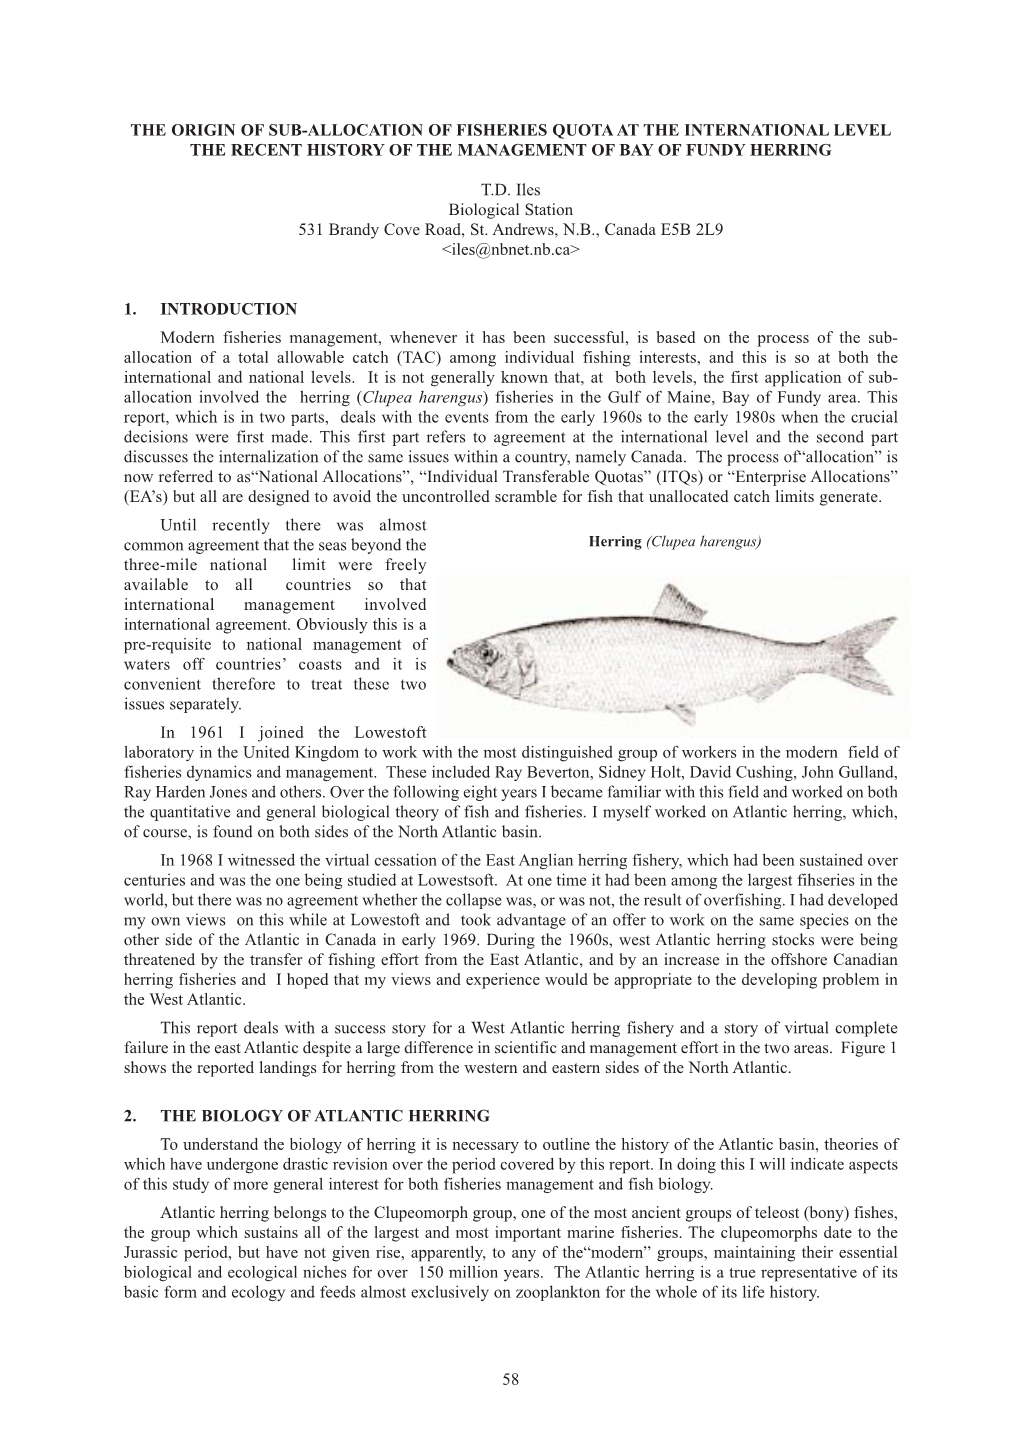 The Origin of Sub-Allocation of Fisheries Quota at the International Level the Recent History of the Management of Bay of Fundy Herring